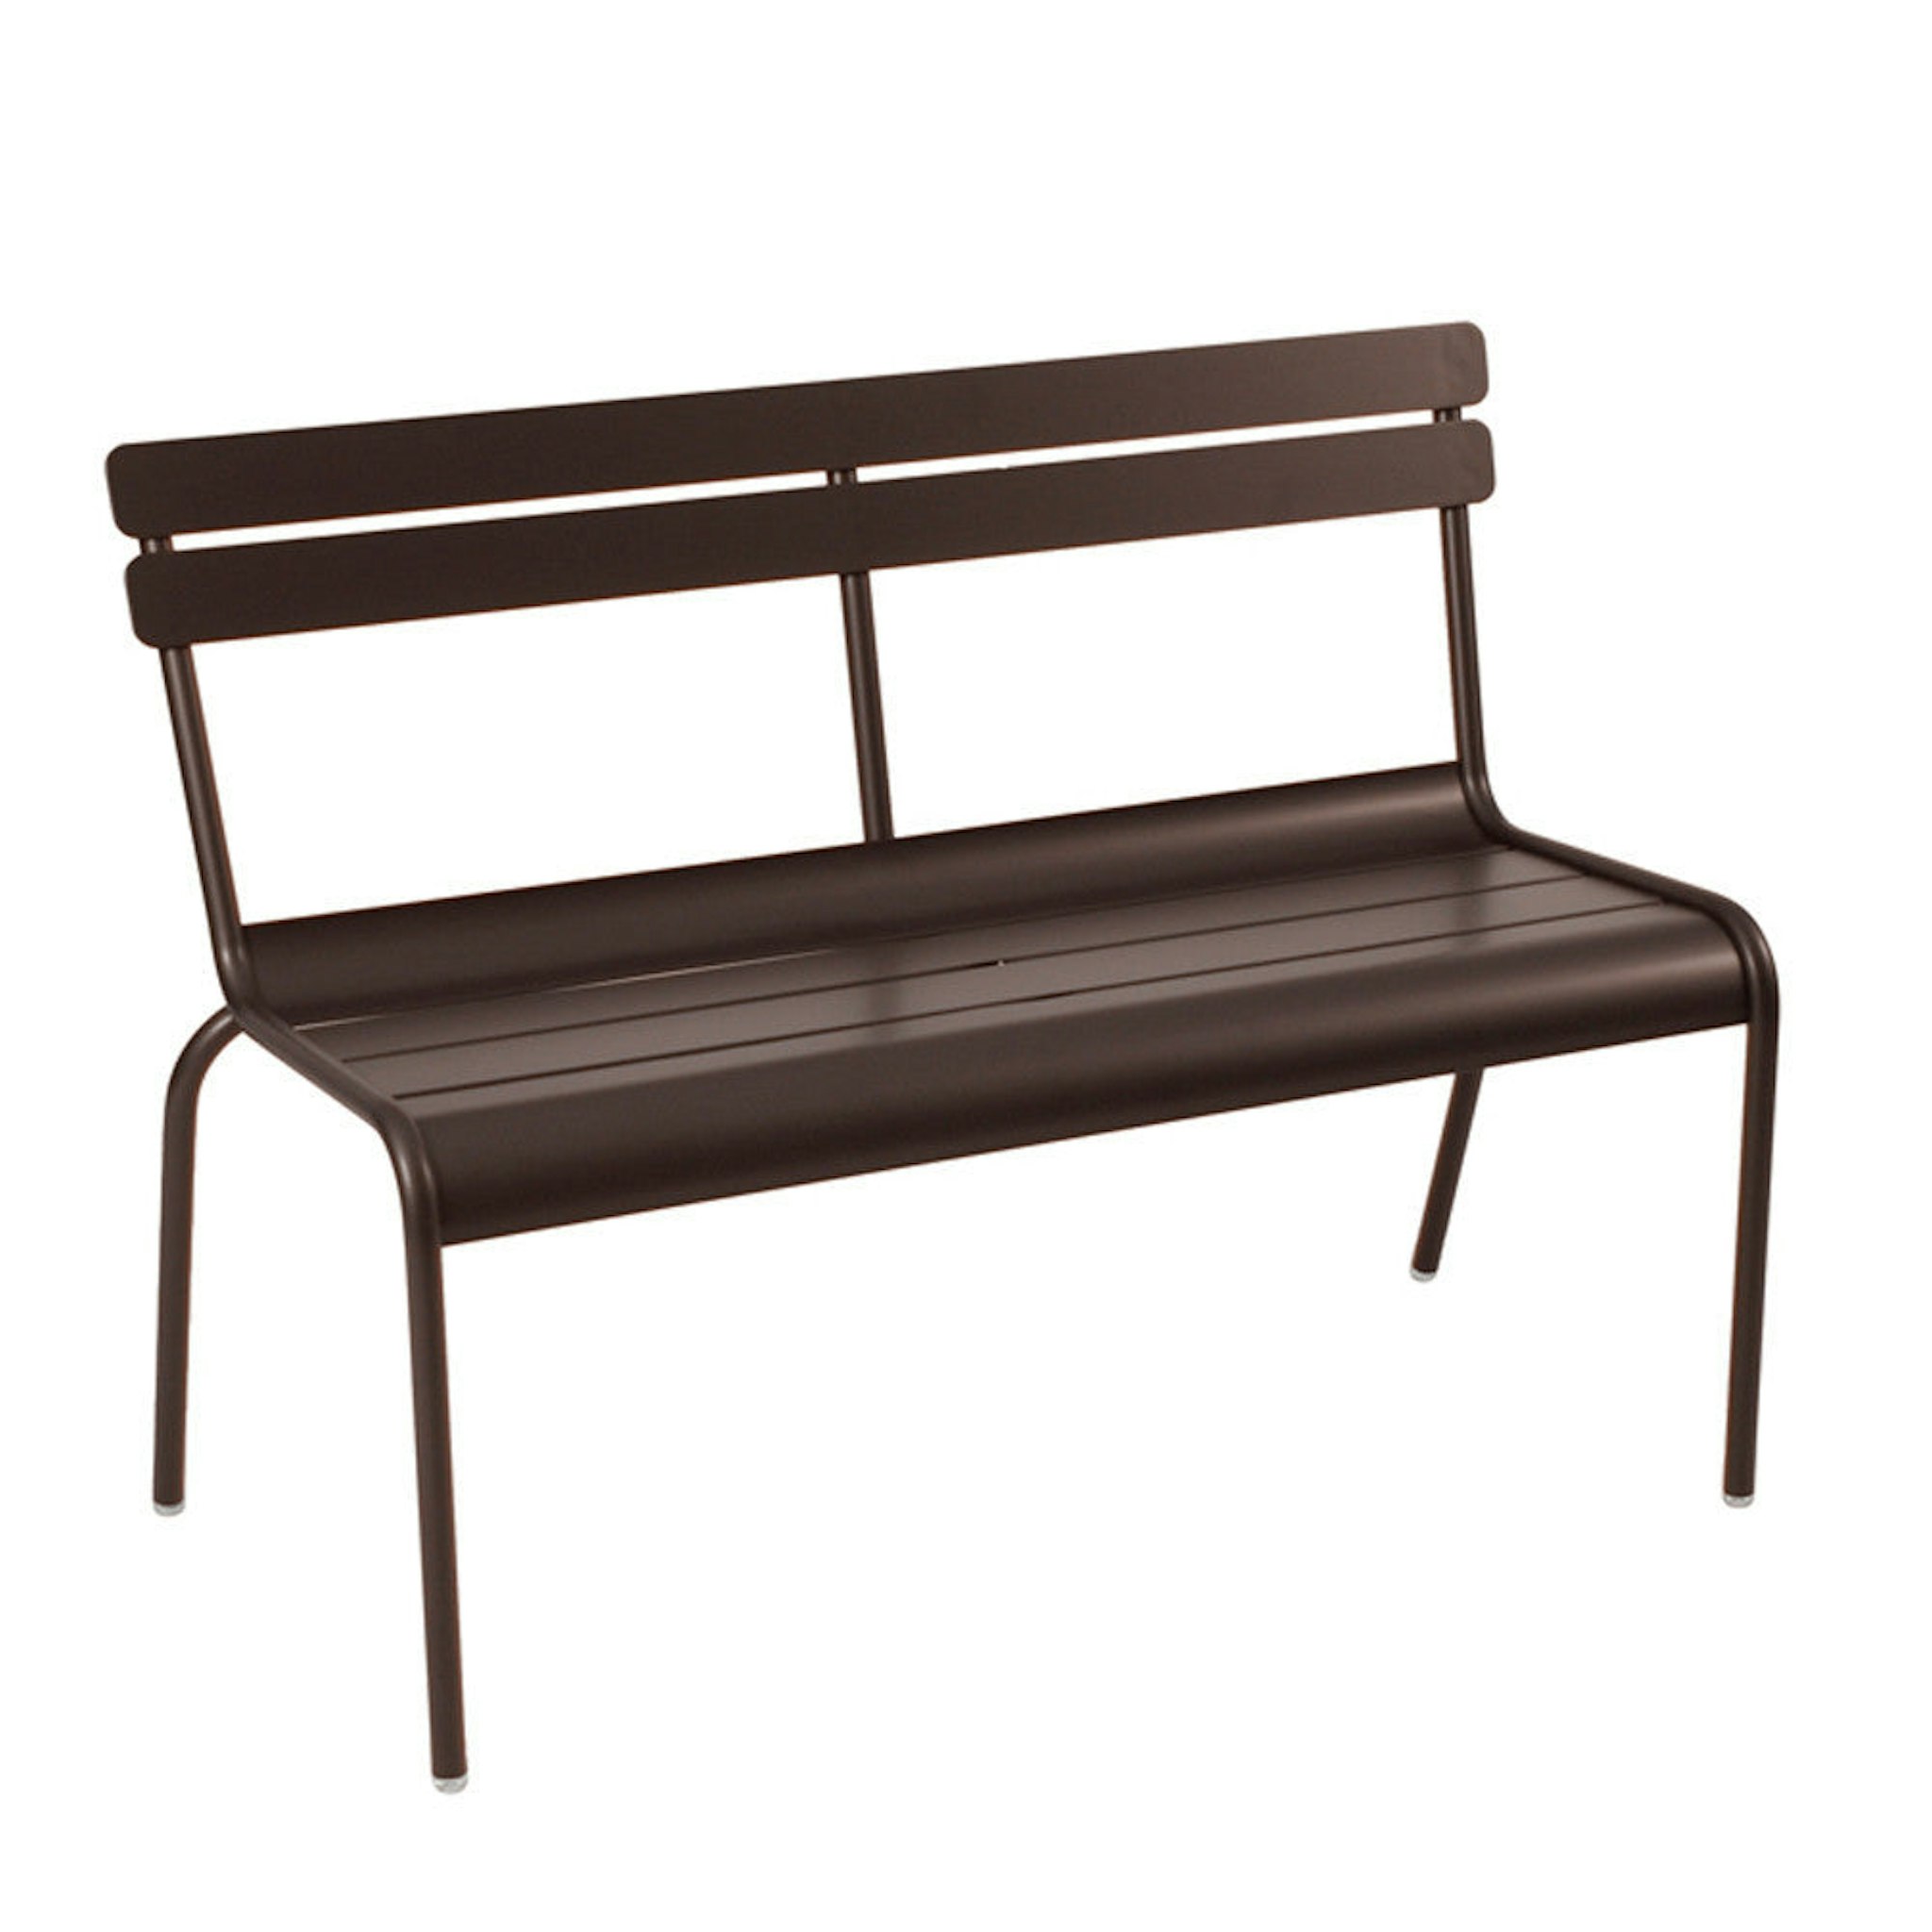 Luxembourg Stacking Bench by Fermob